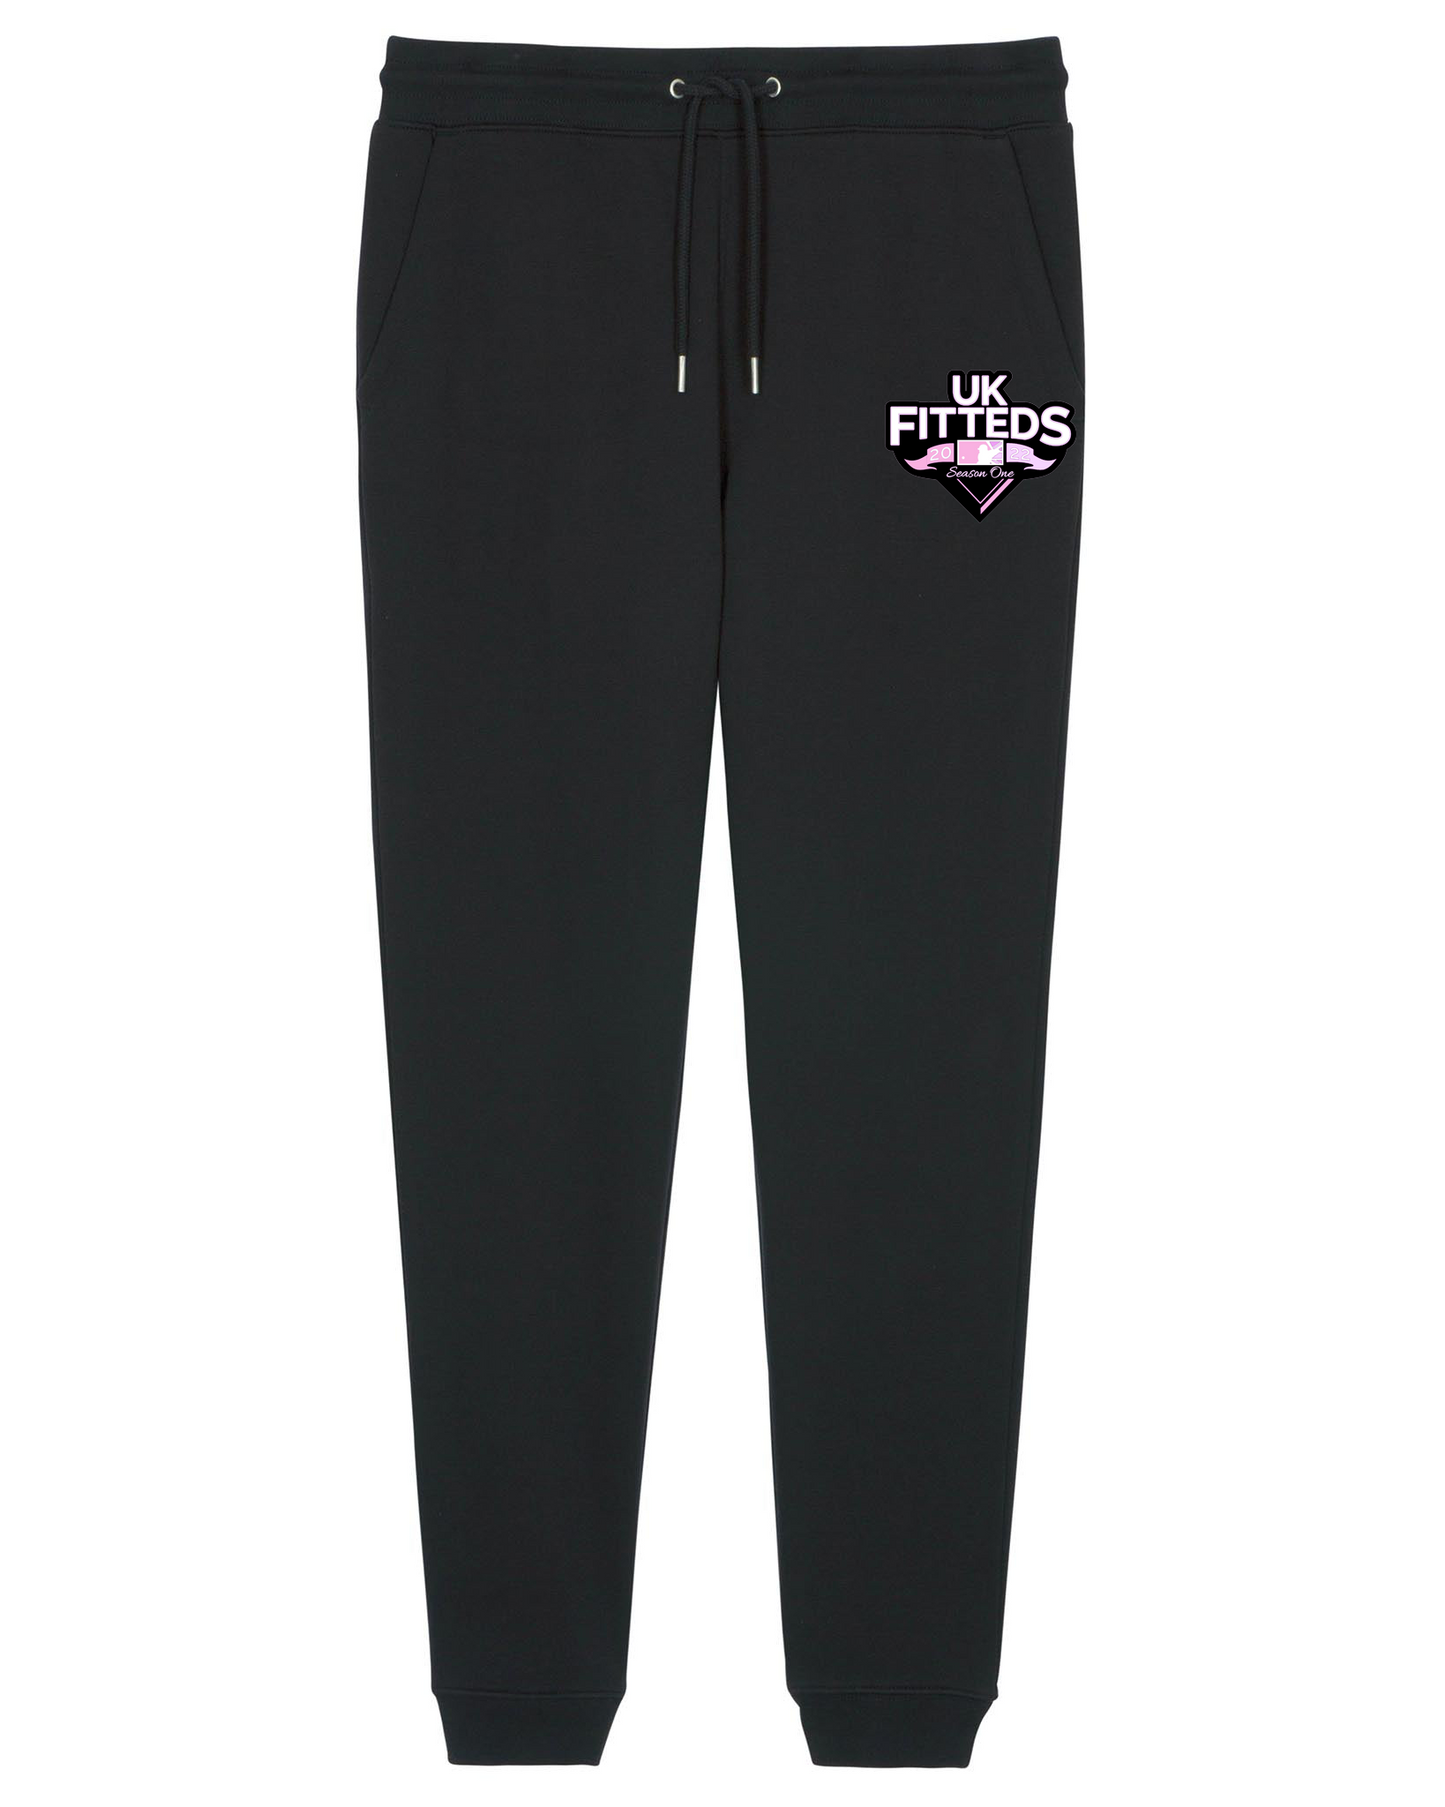 UKFitteds S1 Track Bottoms Black/Pink Colourway